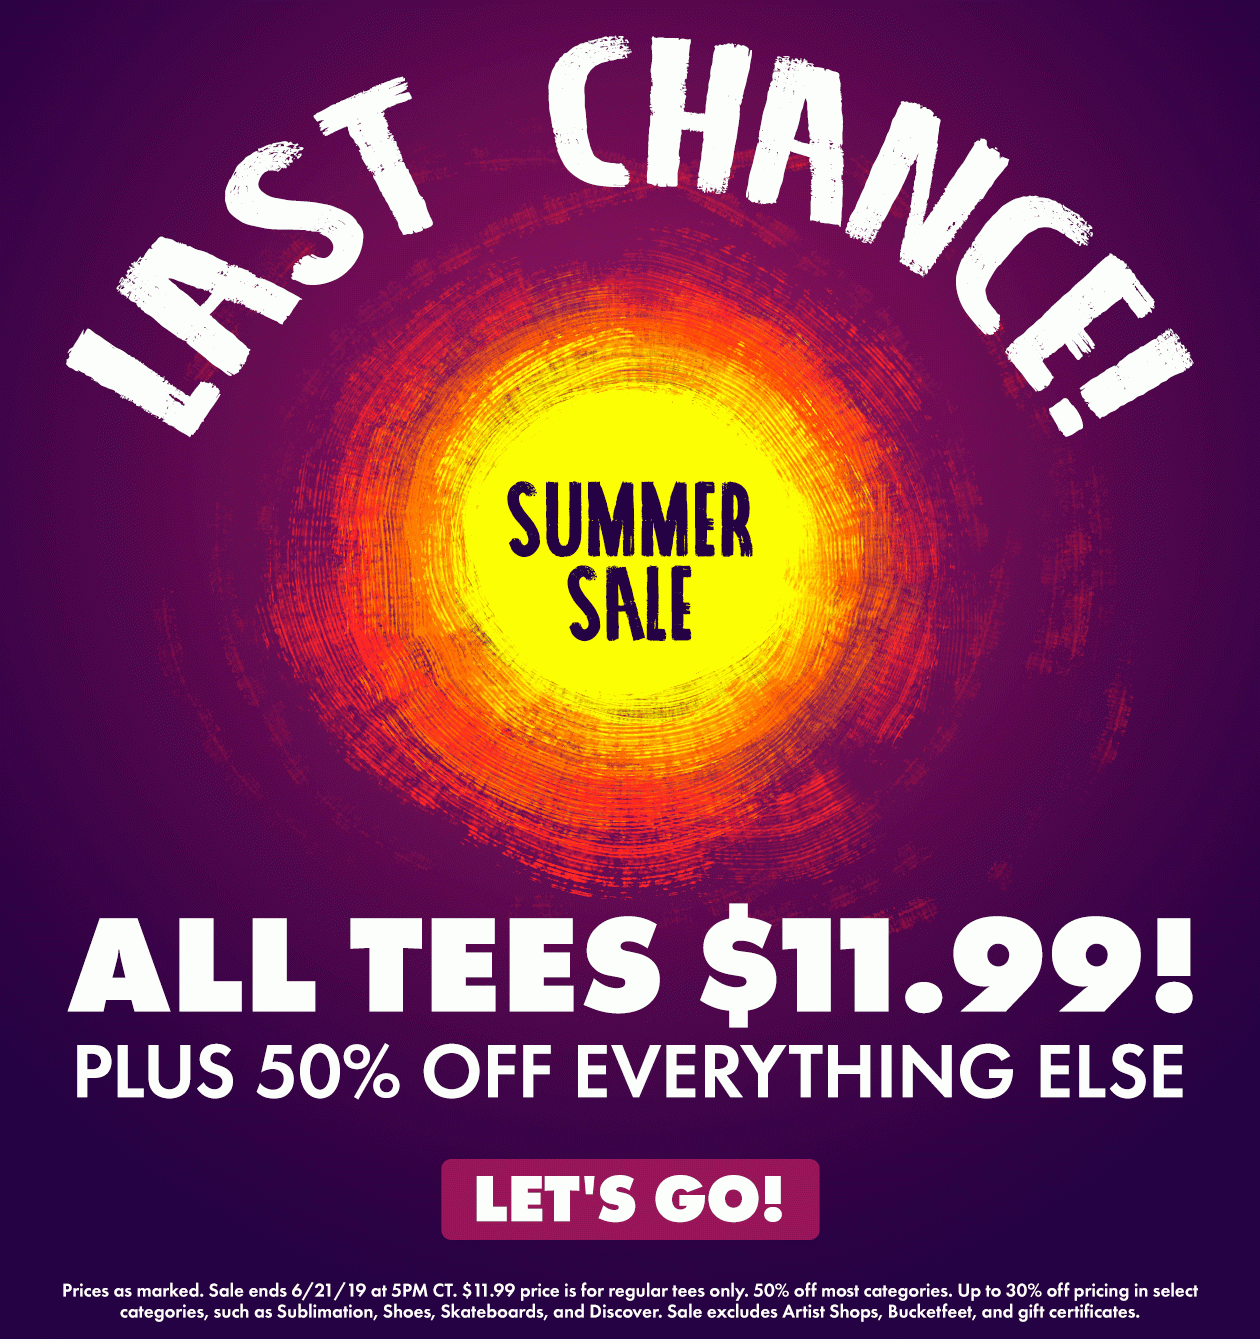 Last Chance for $11.99 Tees!